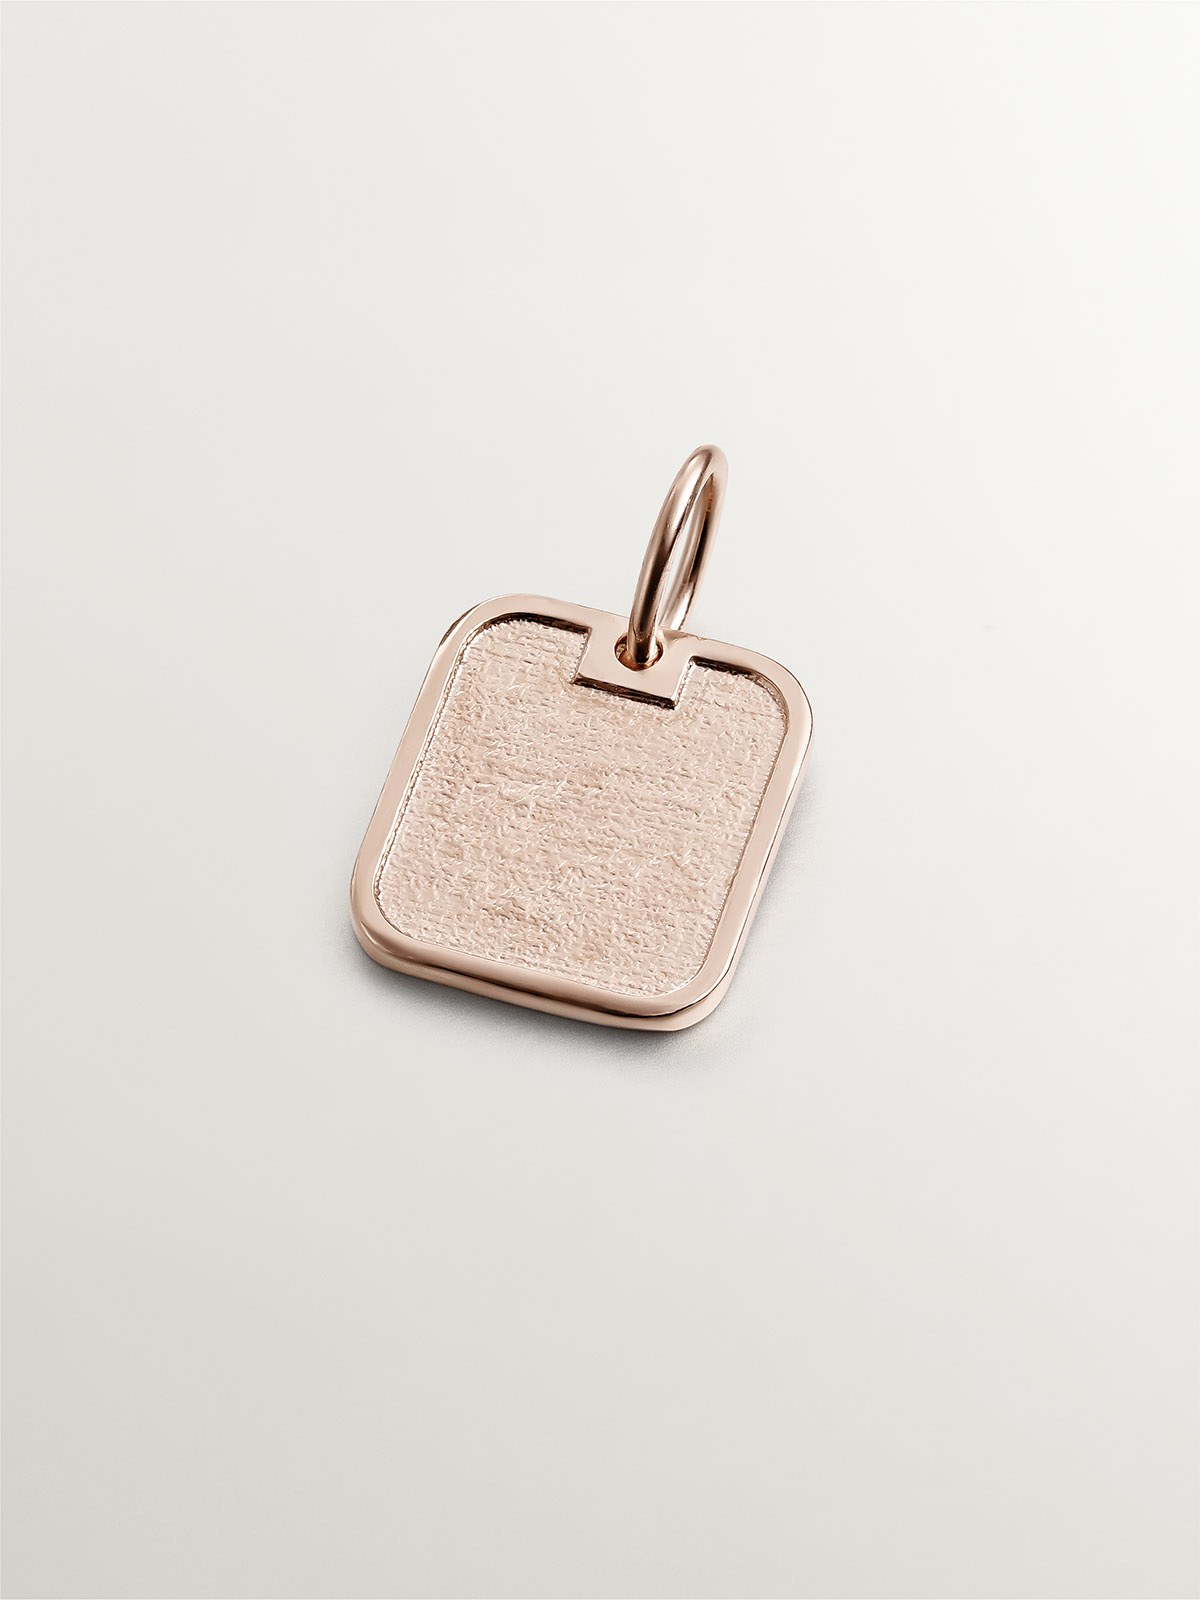 925 silver charm bathed in 18k rose gold with number 8